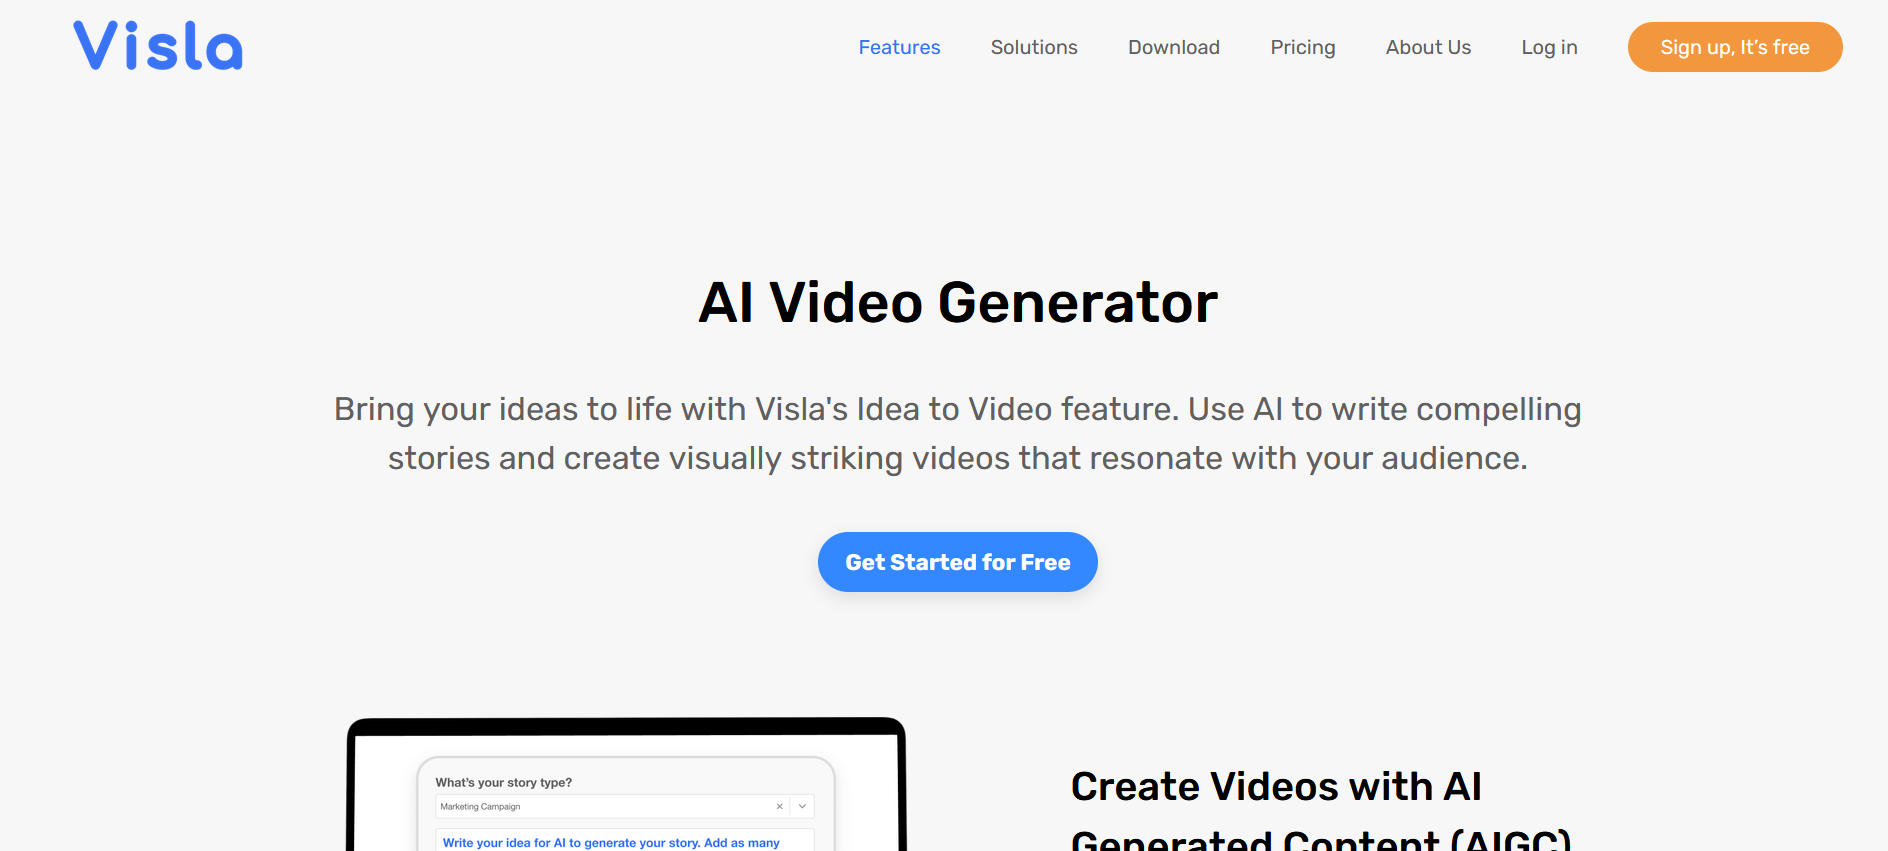 VislaThe video creation editing tool allows for quick and